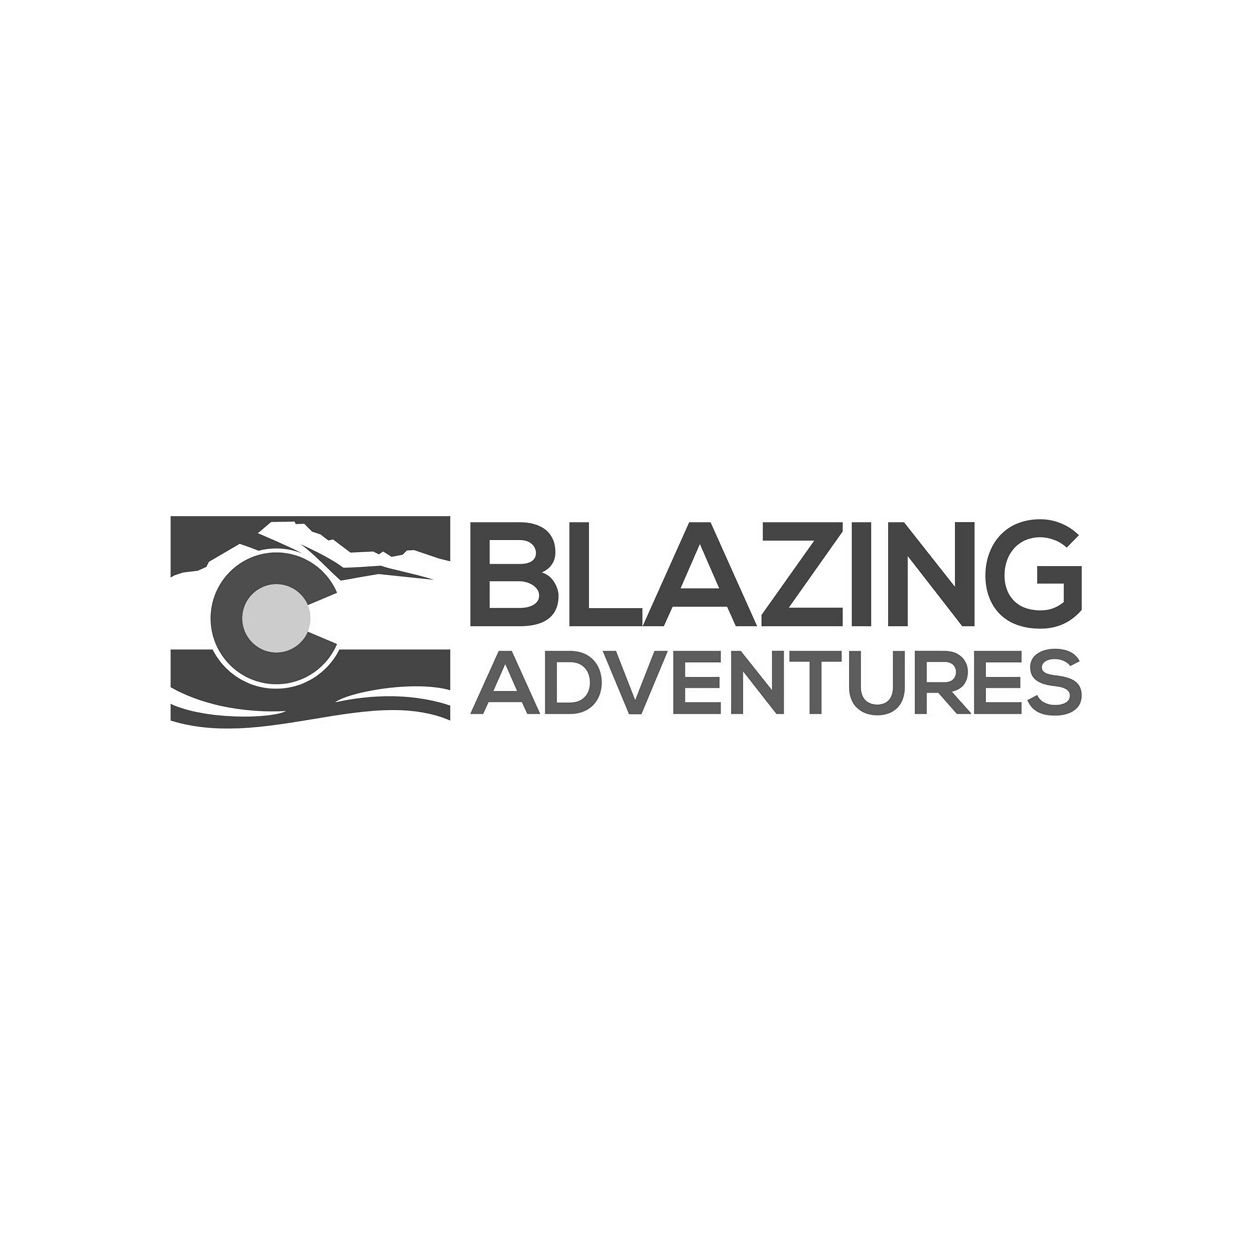 Blazing Adventures logo for shop page